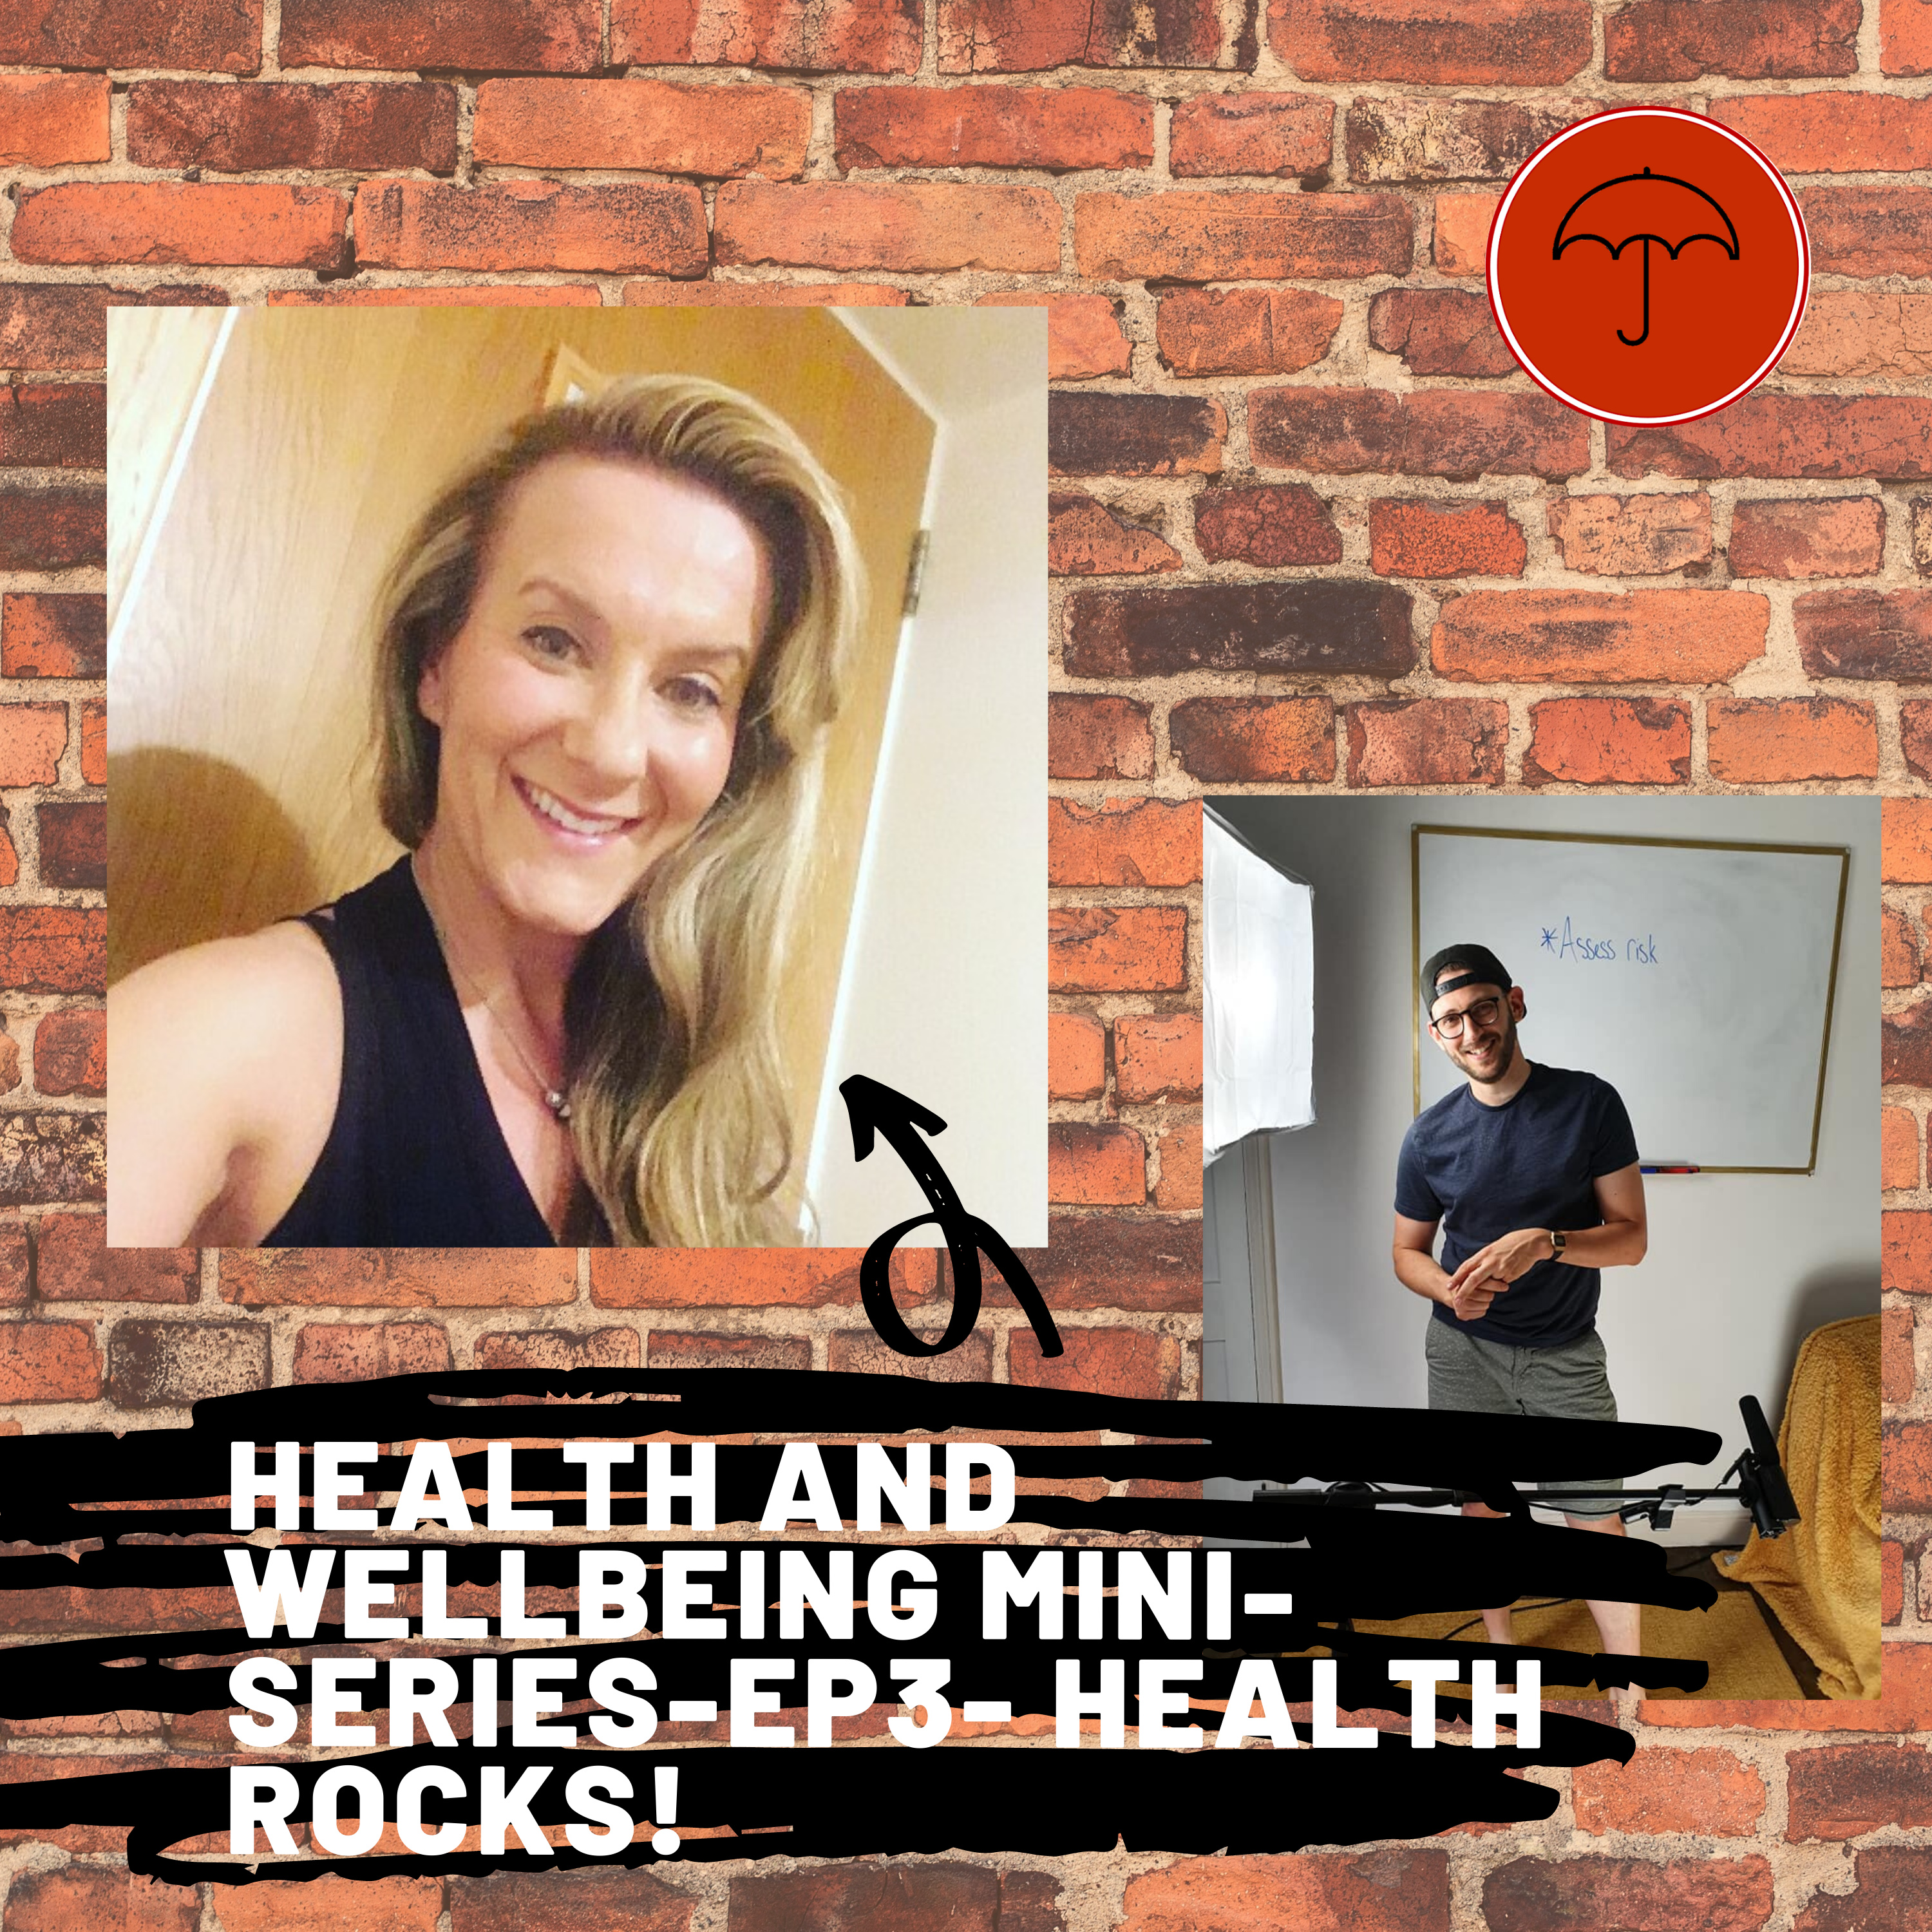 Health Rocks with Carla Crocombe- Health and Wellbeing miniseries part 3-PODCAST ep 75